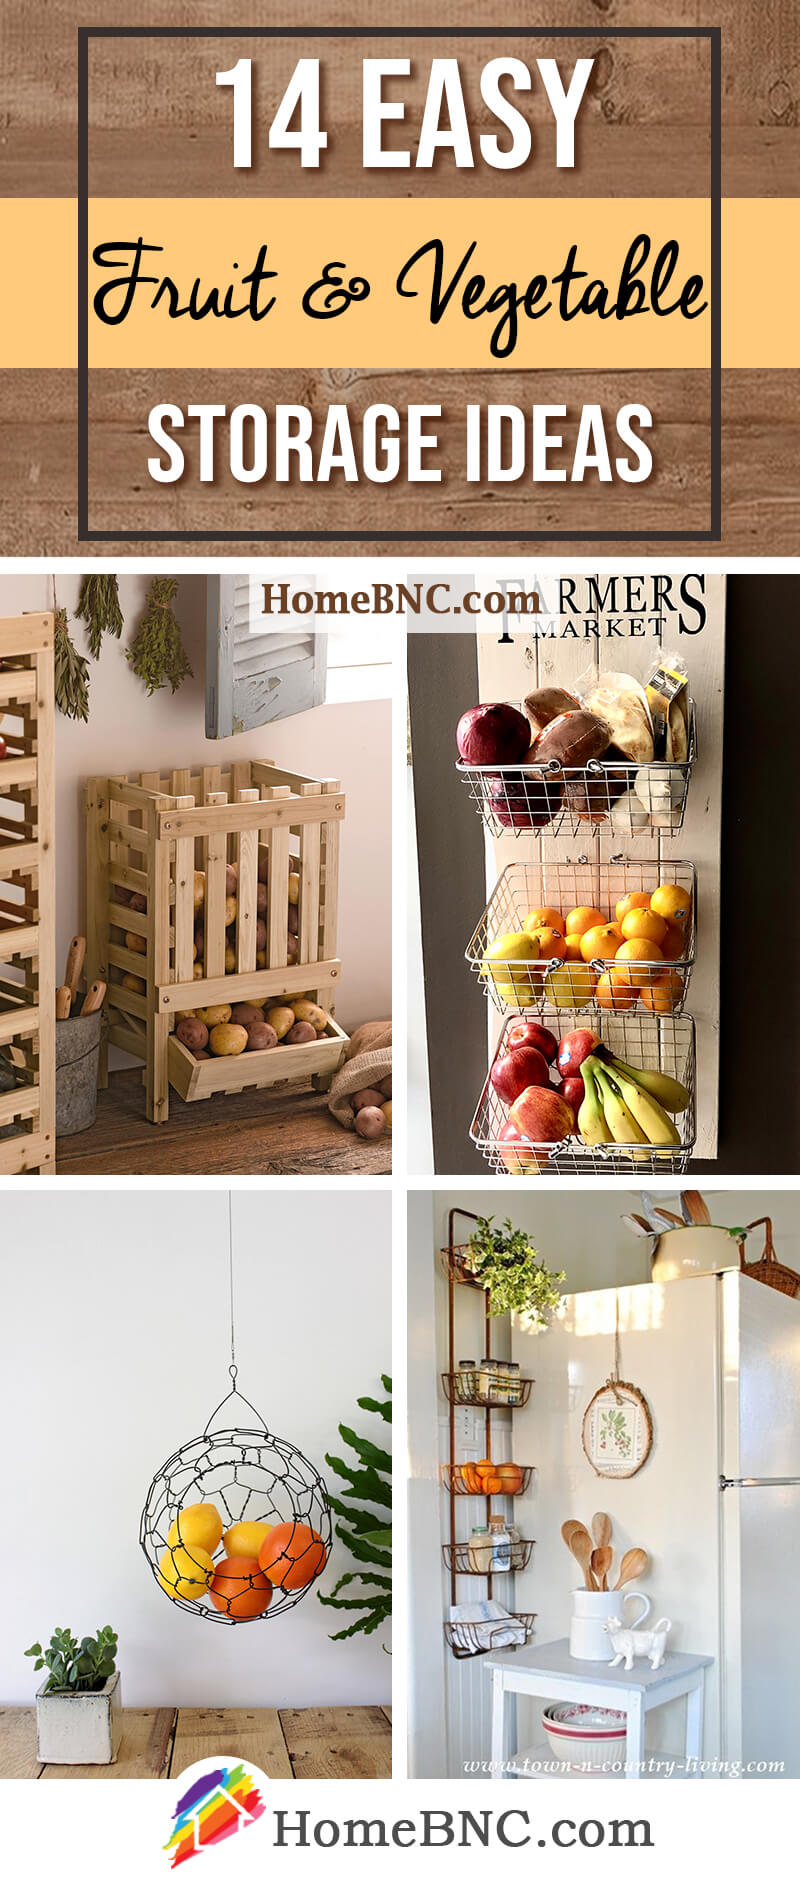 Top 10 Produce Storage Solutions